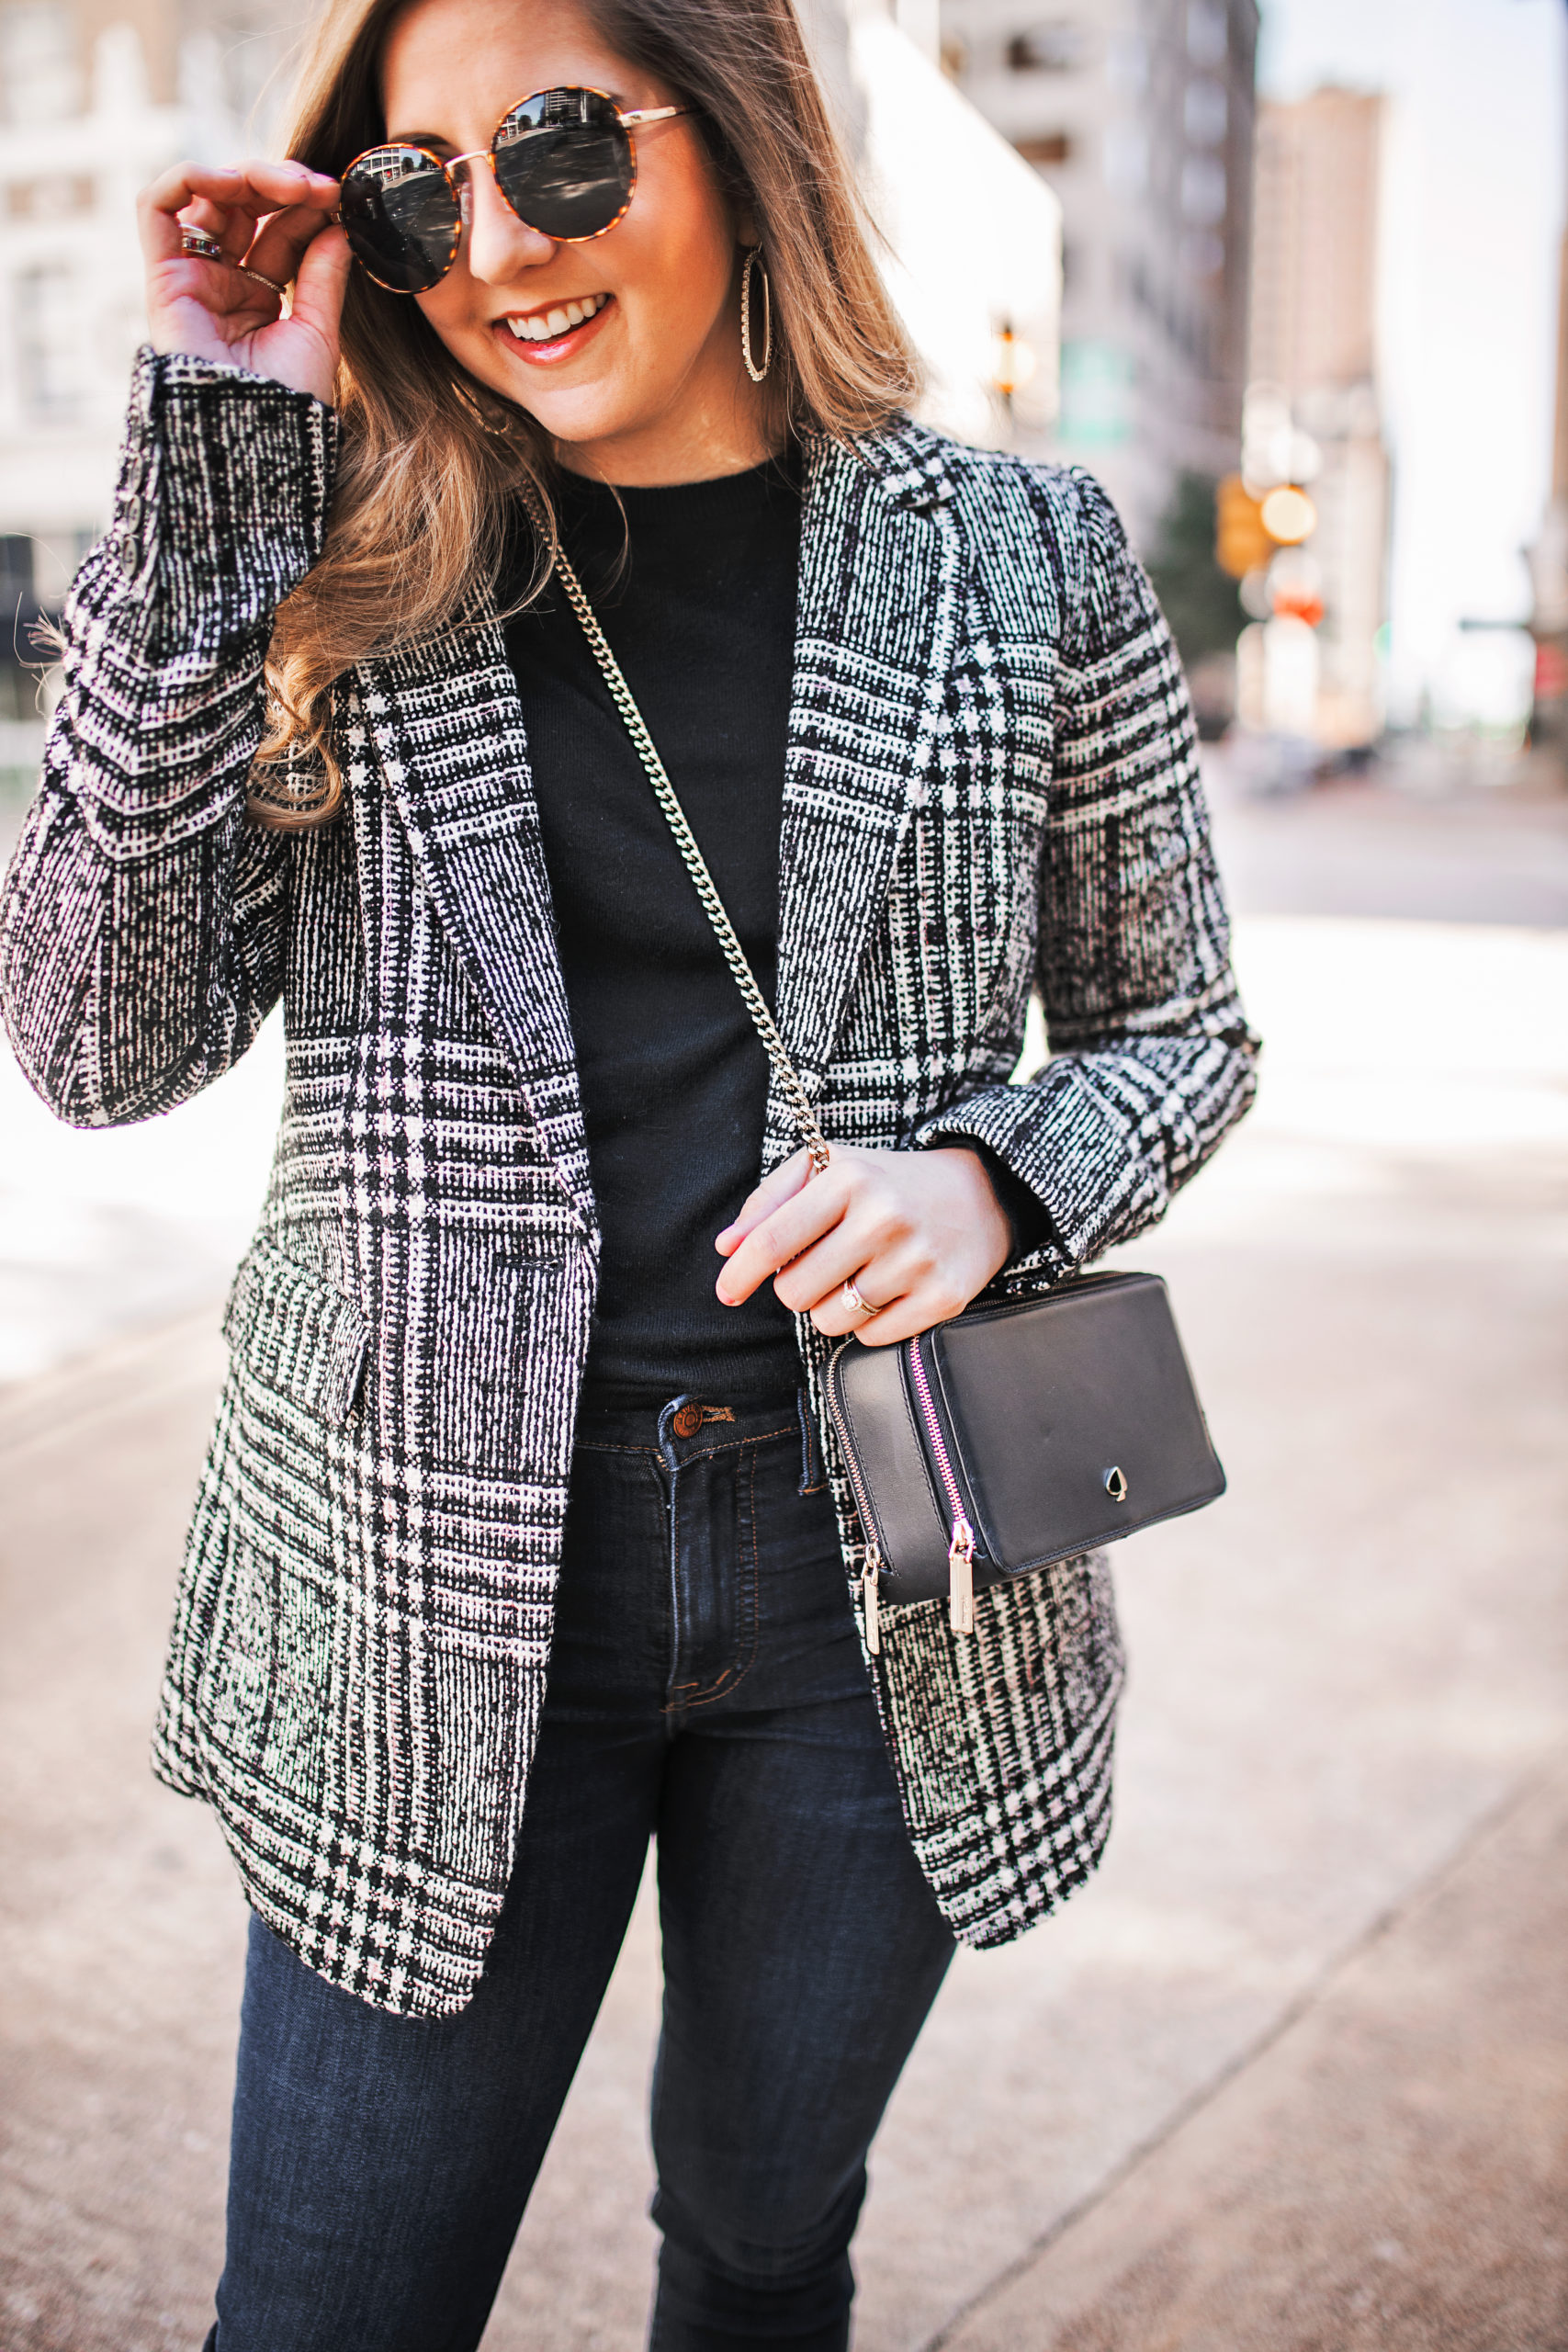 How To Style A Long Blazer For Work - Thrifty Pineapple